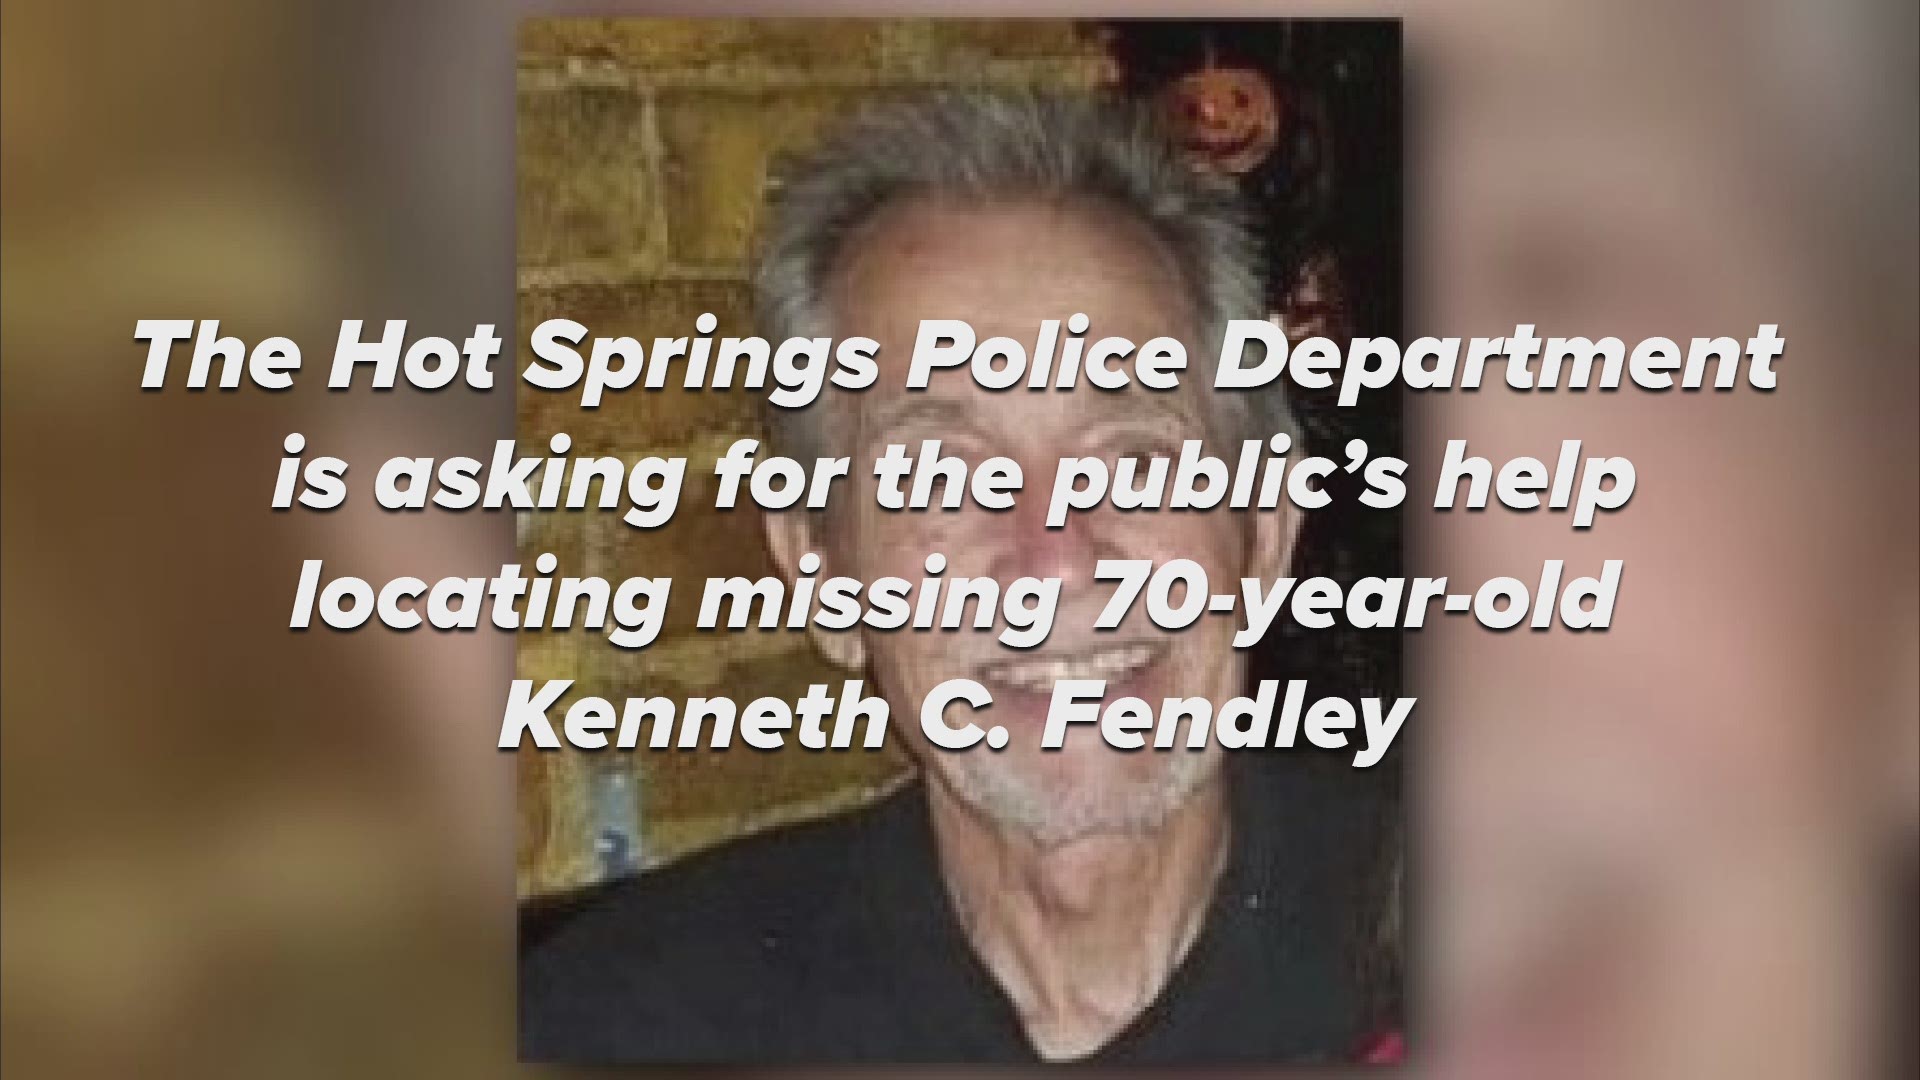 The Hot Springs Police Department is asking for the public's help locating missing 70-year-old Kenneth C. Fendley.